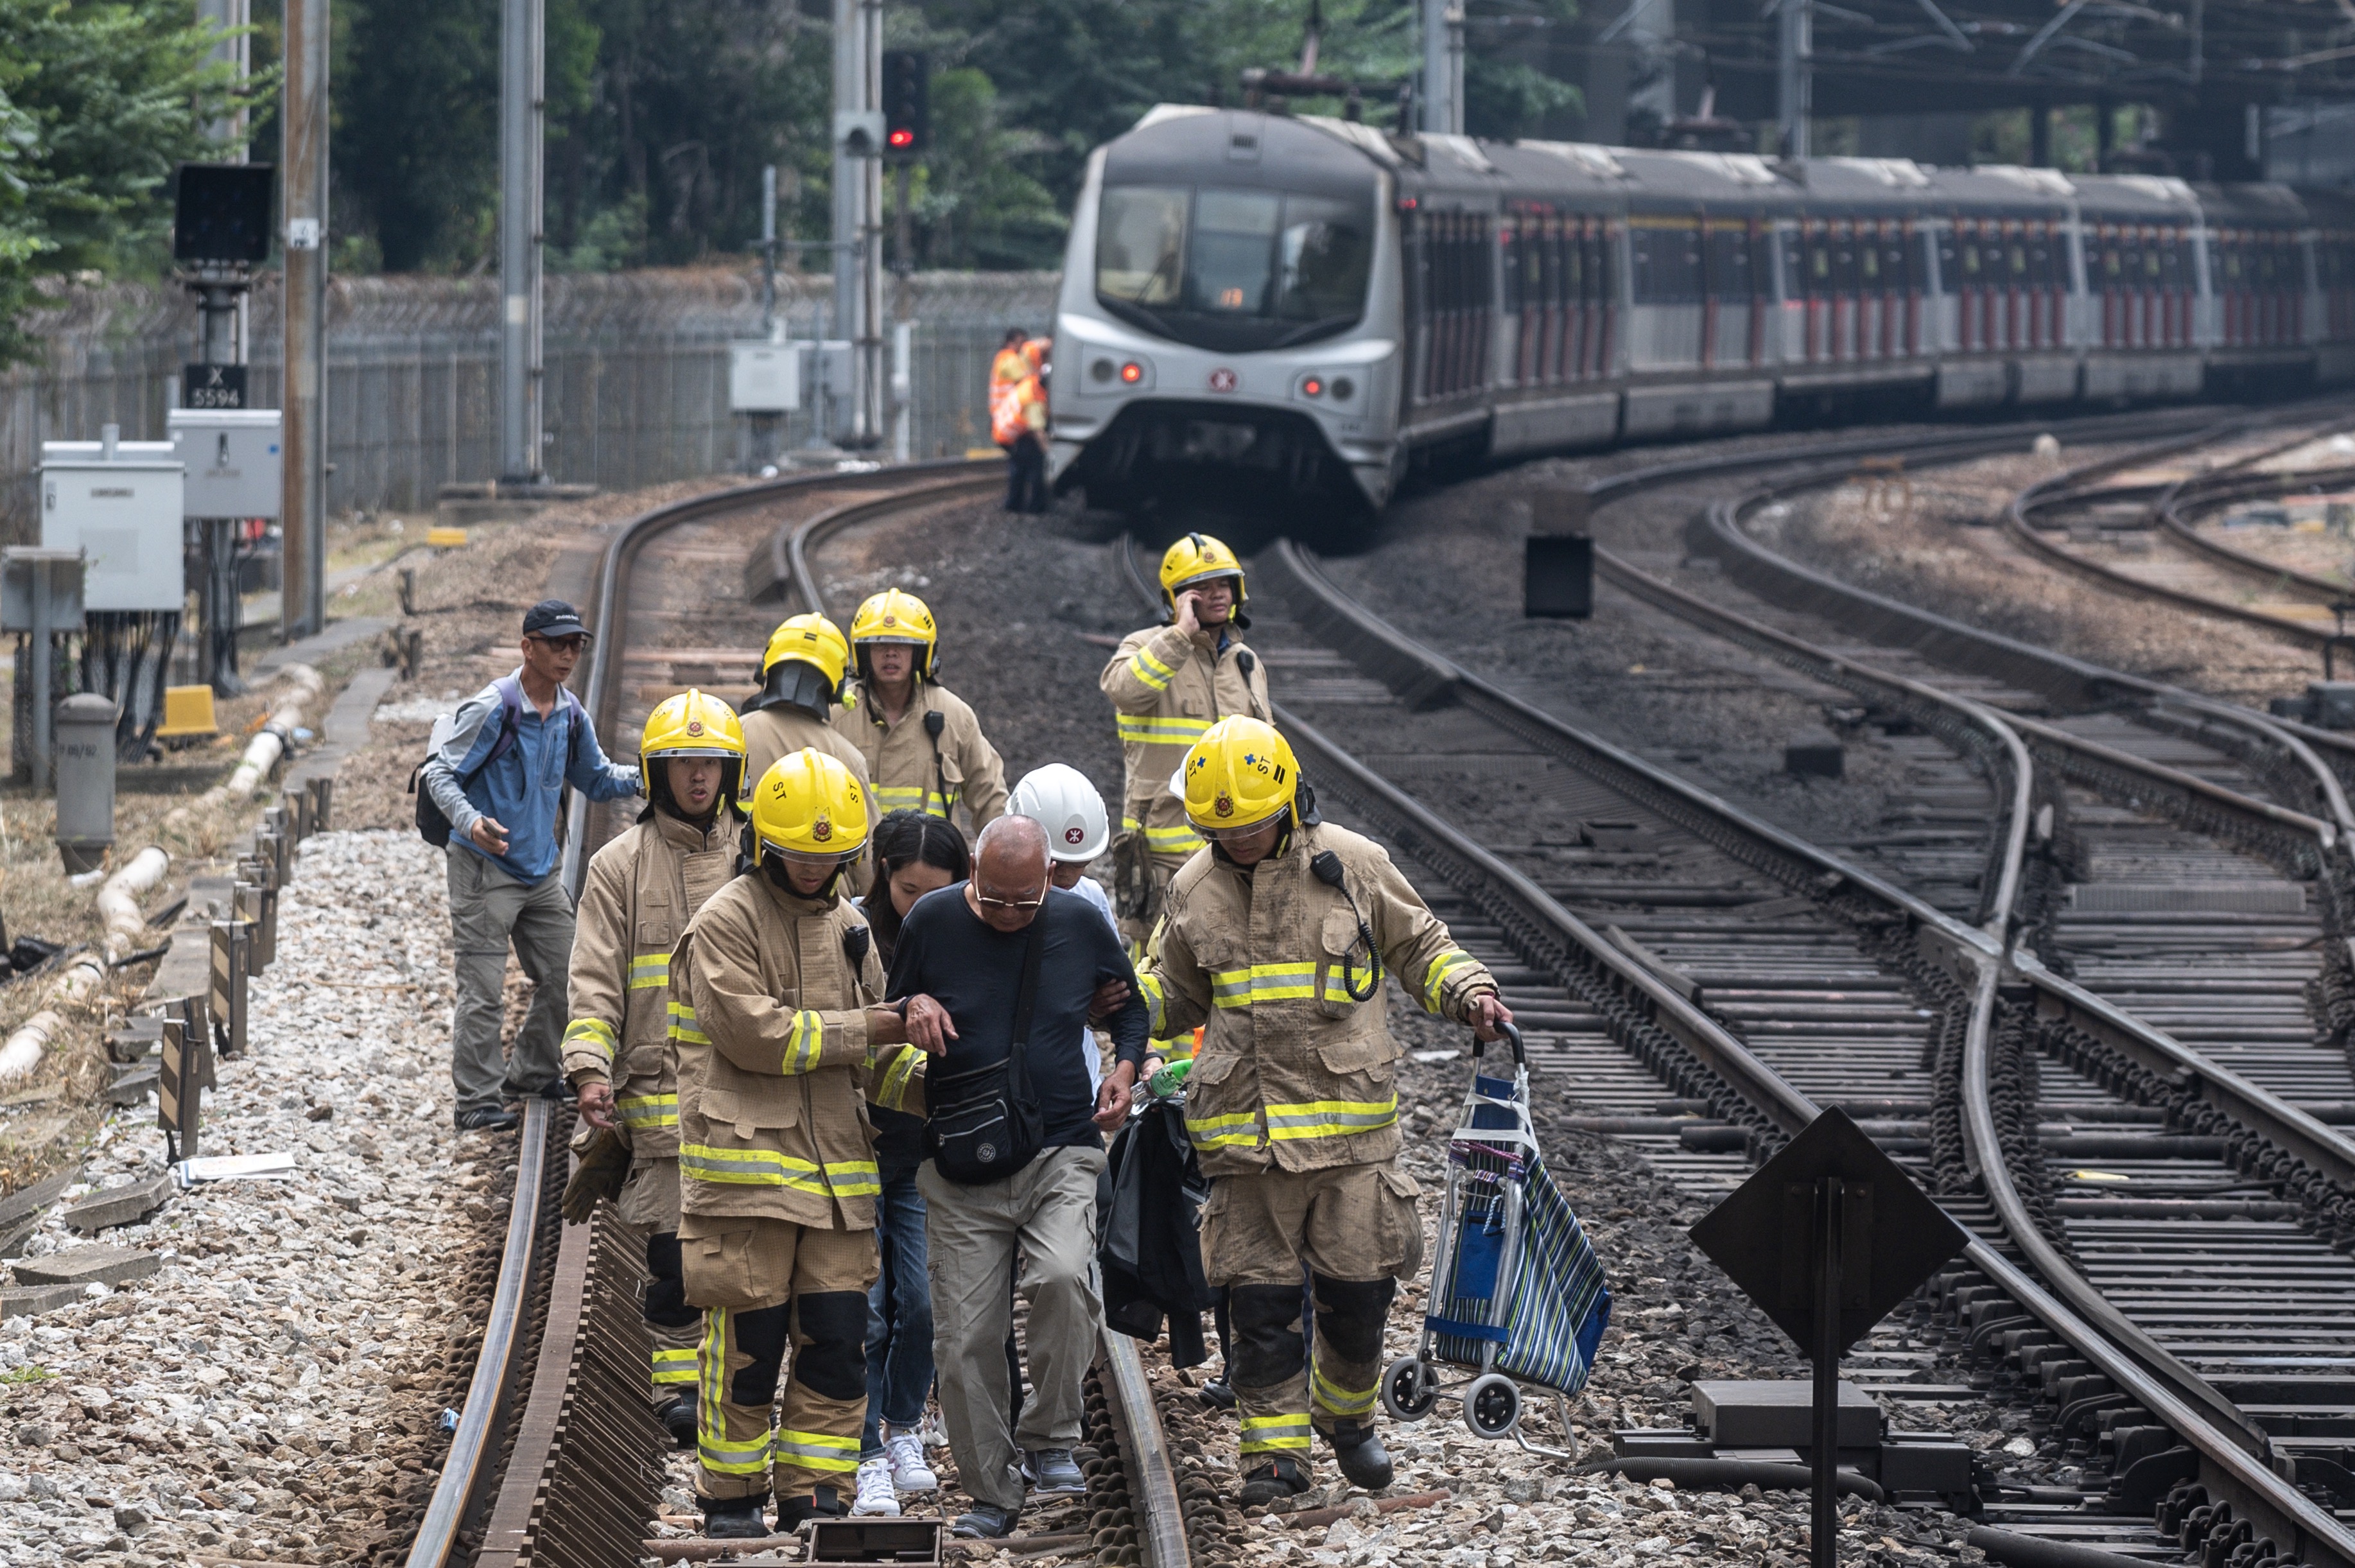 A man is escorted by firemen on the train tracks at Sha Tin MTR station due to the disruption of the train services in Hong Kong on November 12, 2019. (PHILIP FONG—AFP via Getty Images)